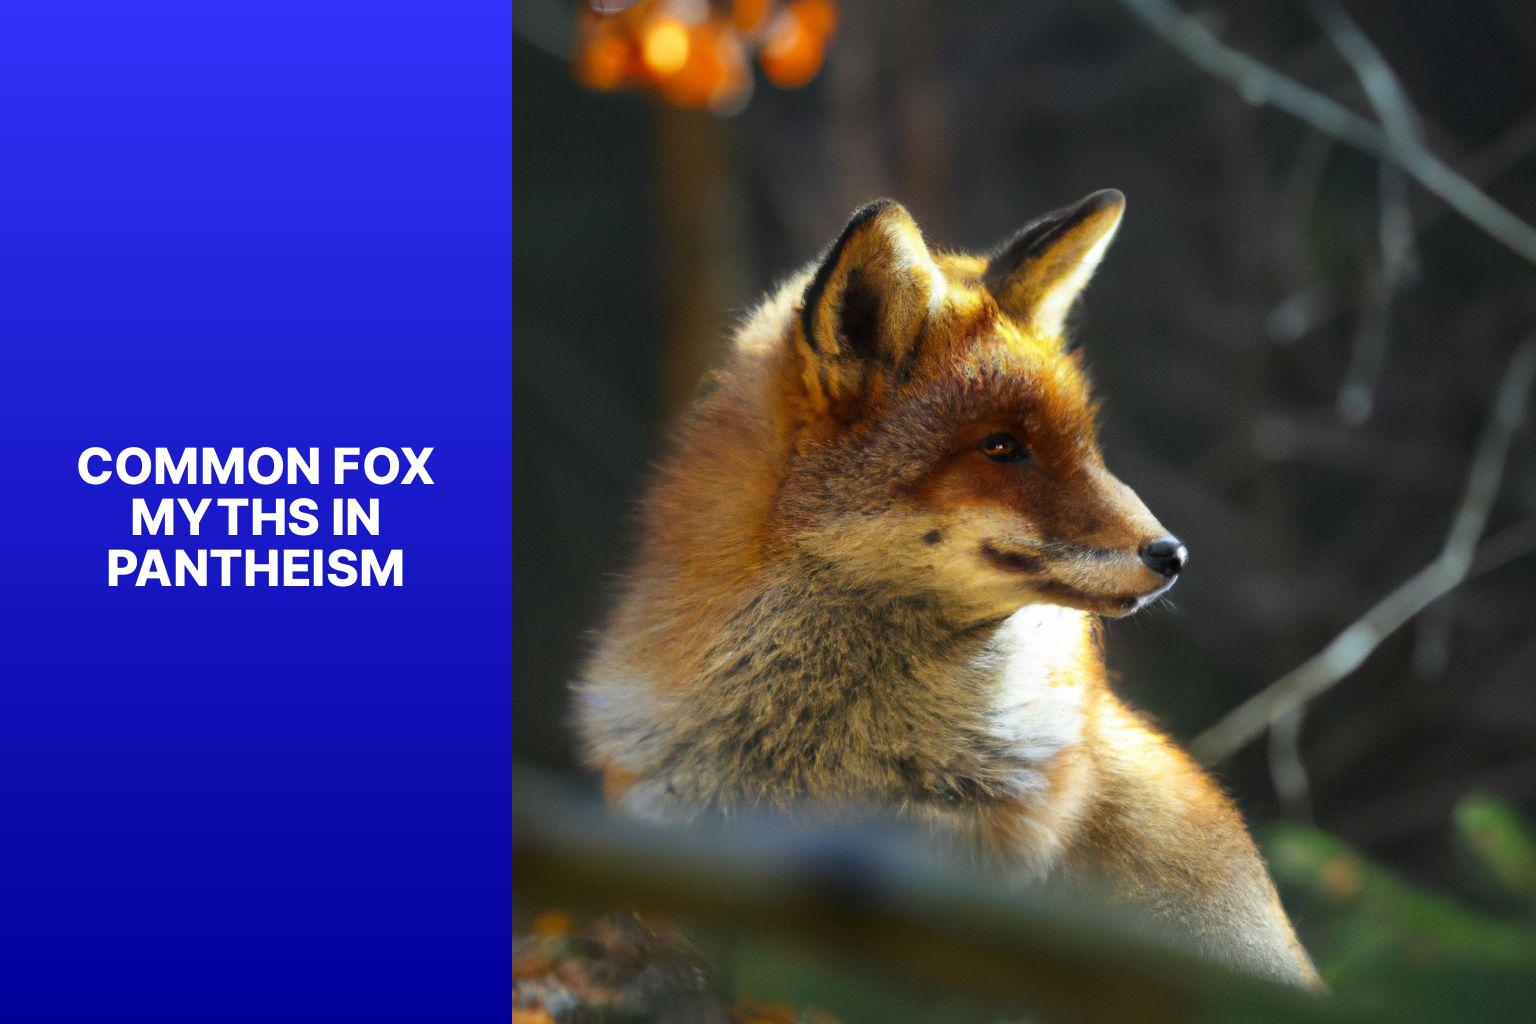 Common Fox Myths in Pantheism - Fox Myths in Pantheism 